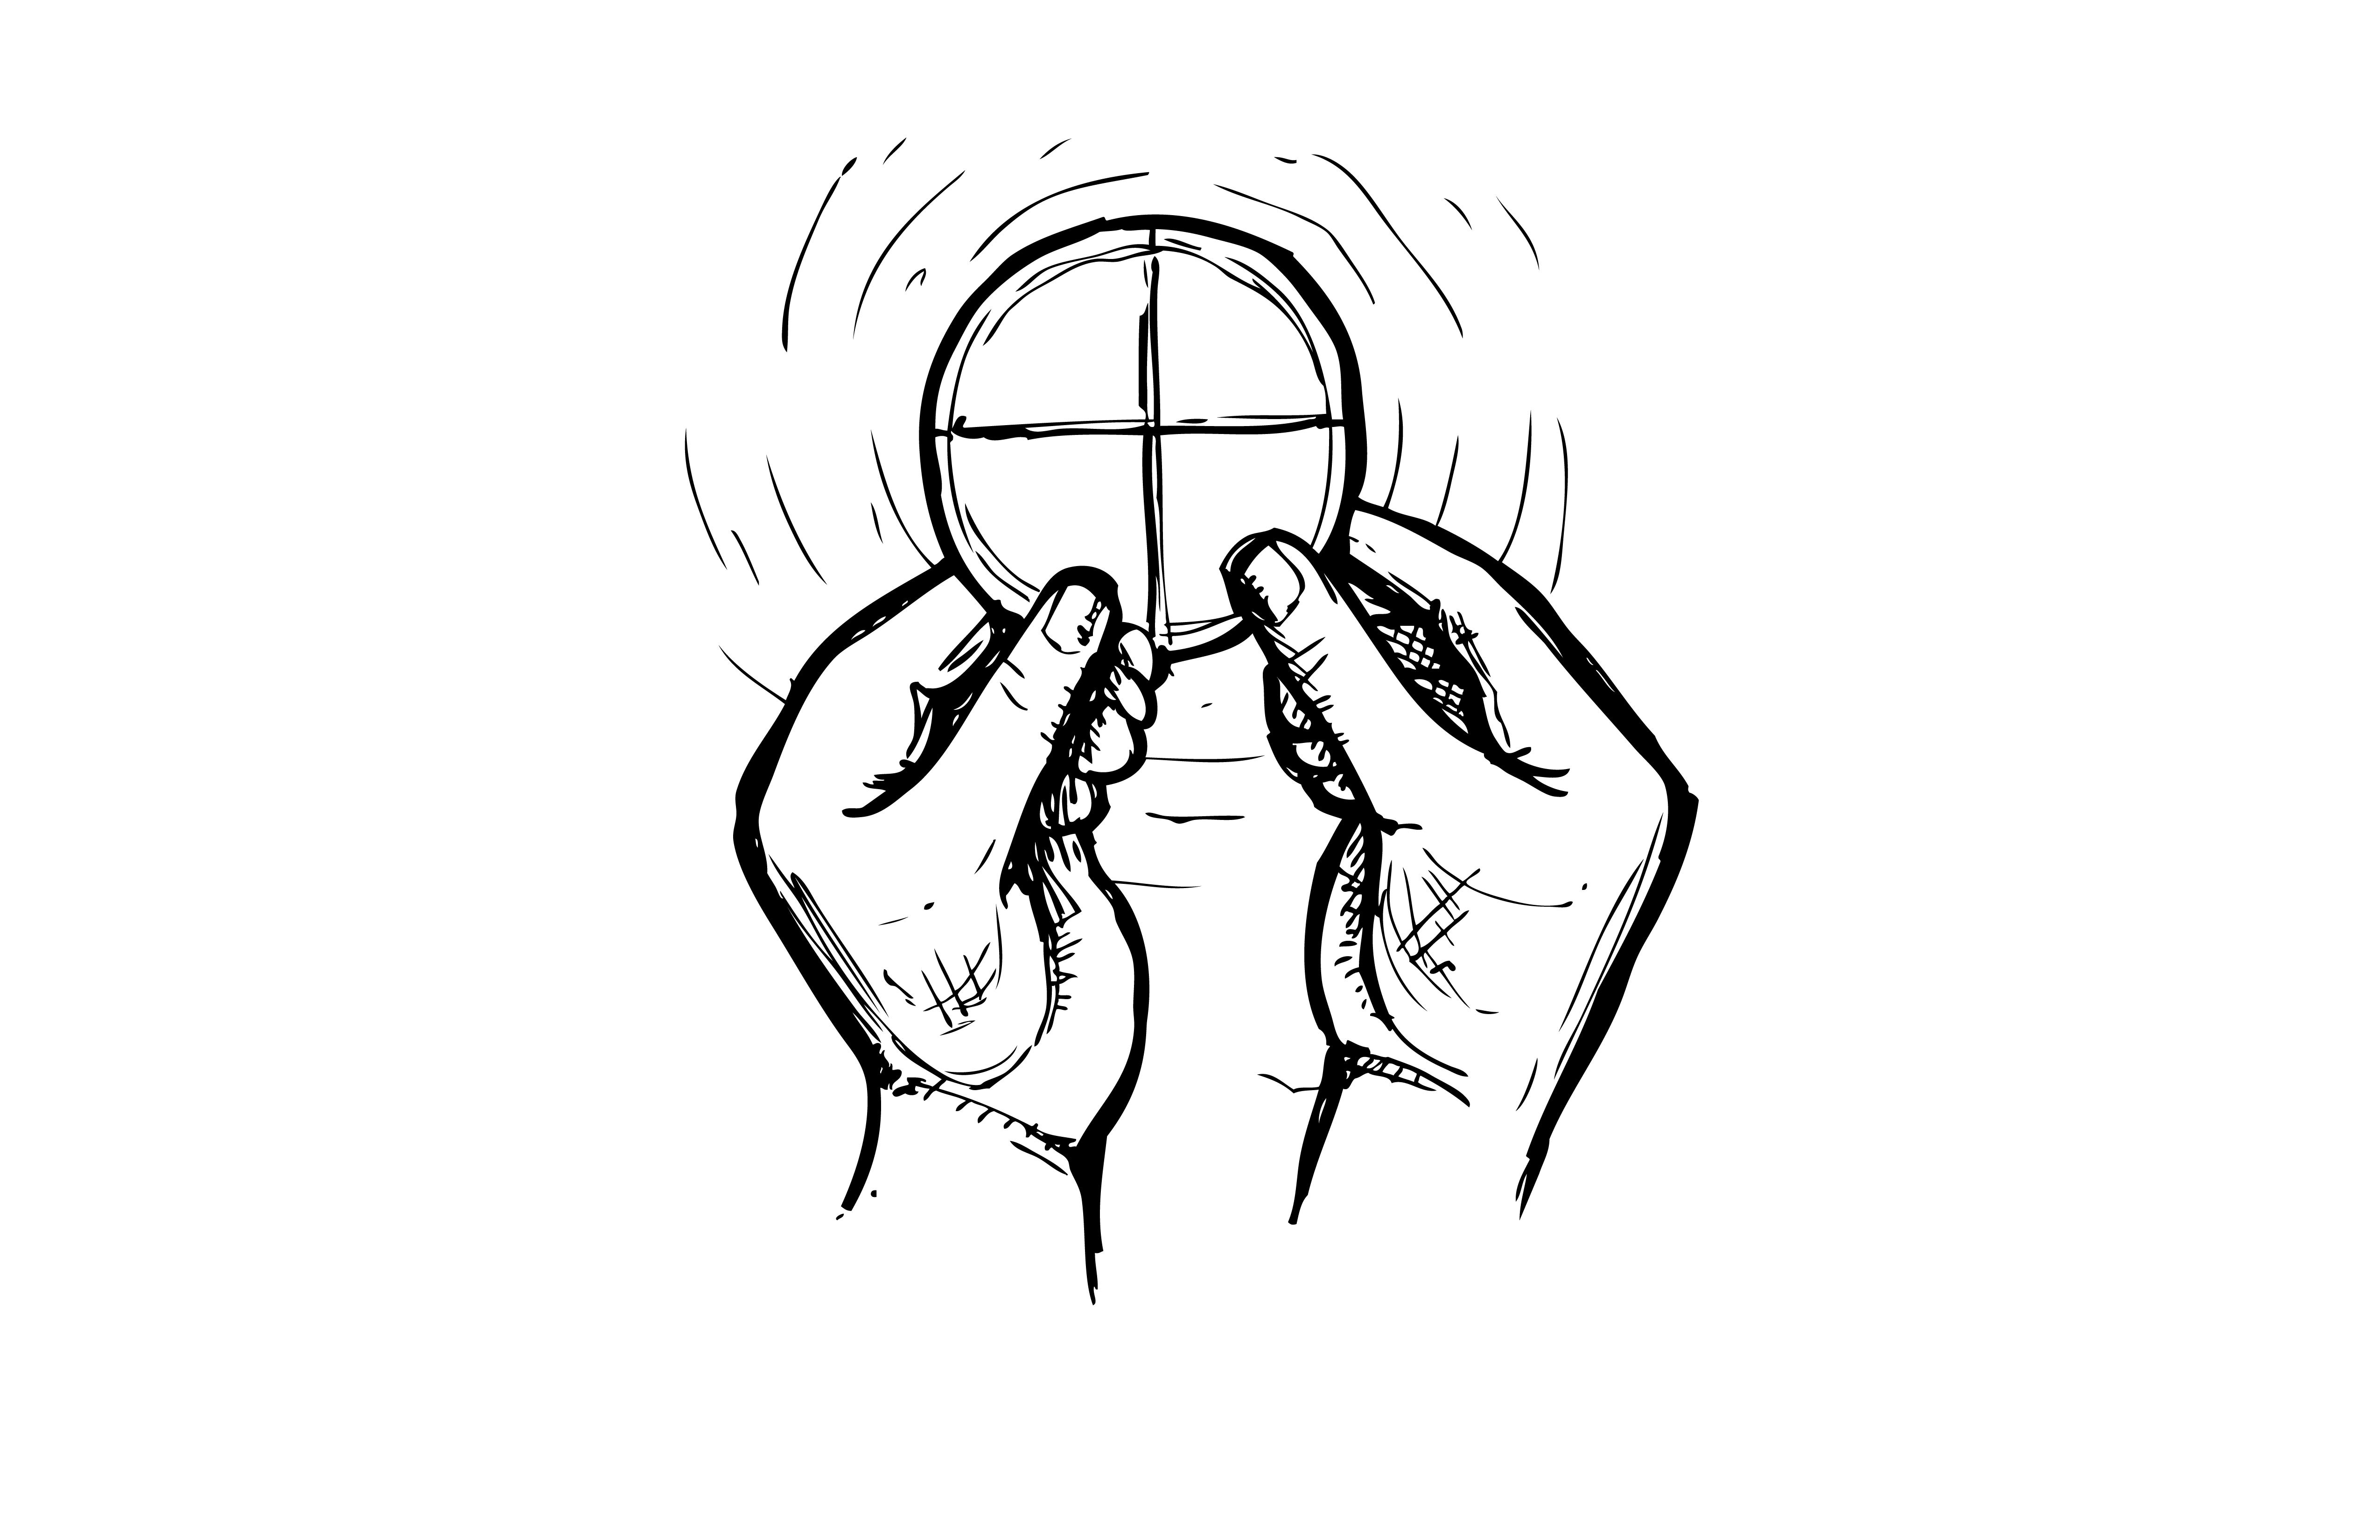 Eucharist Coloring Pages Free - High Quality Coloring Pages